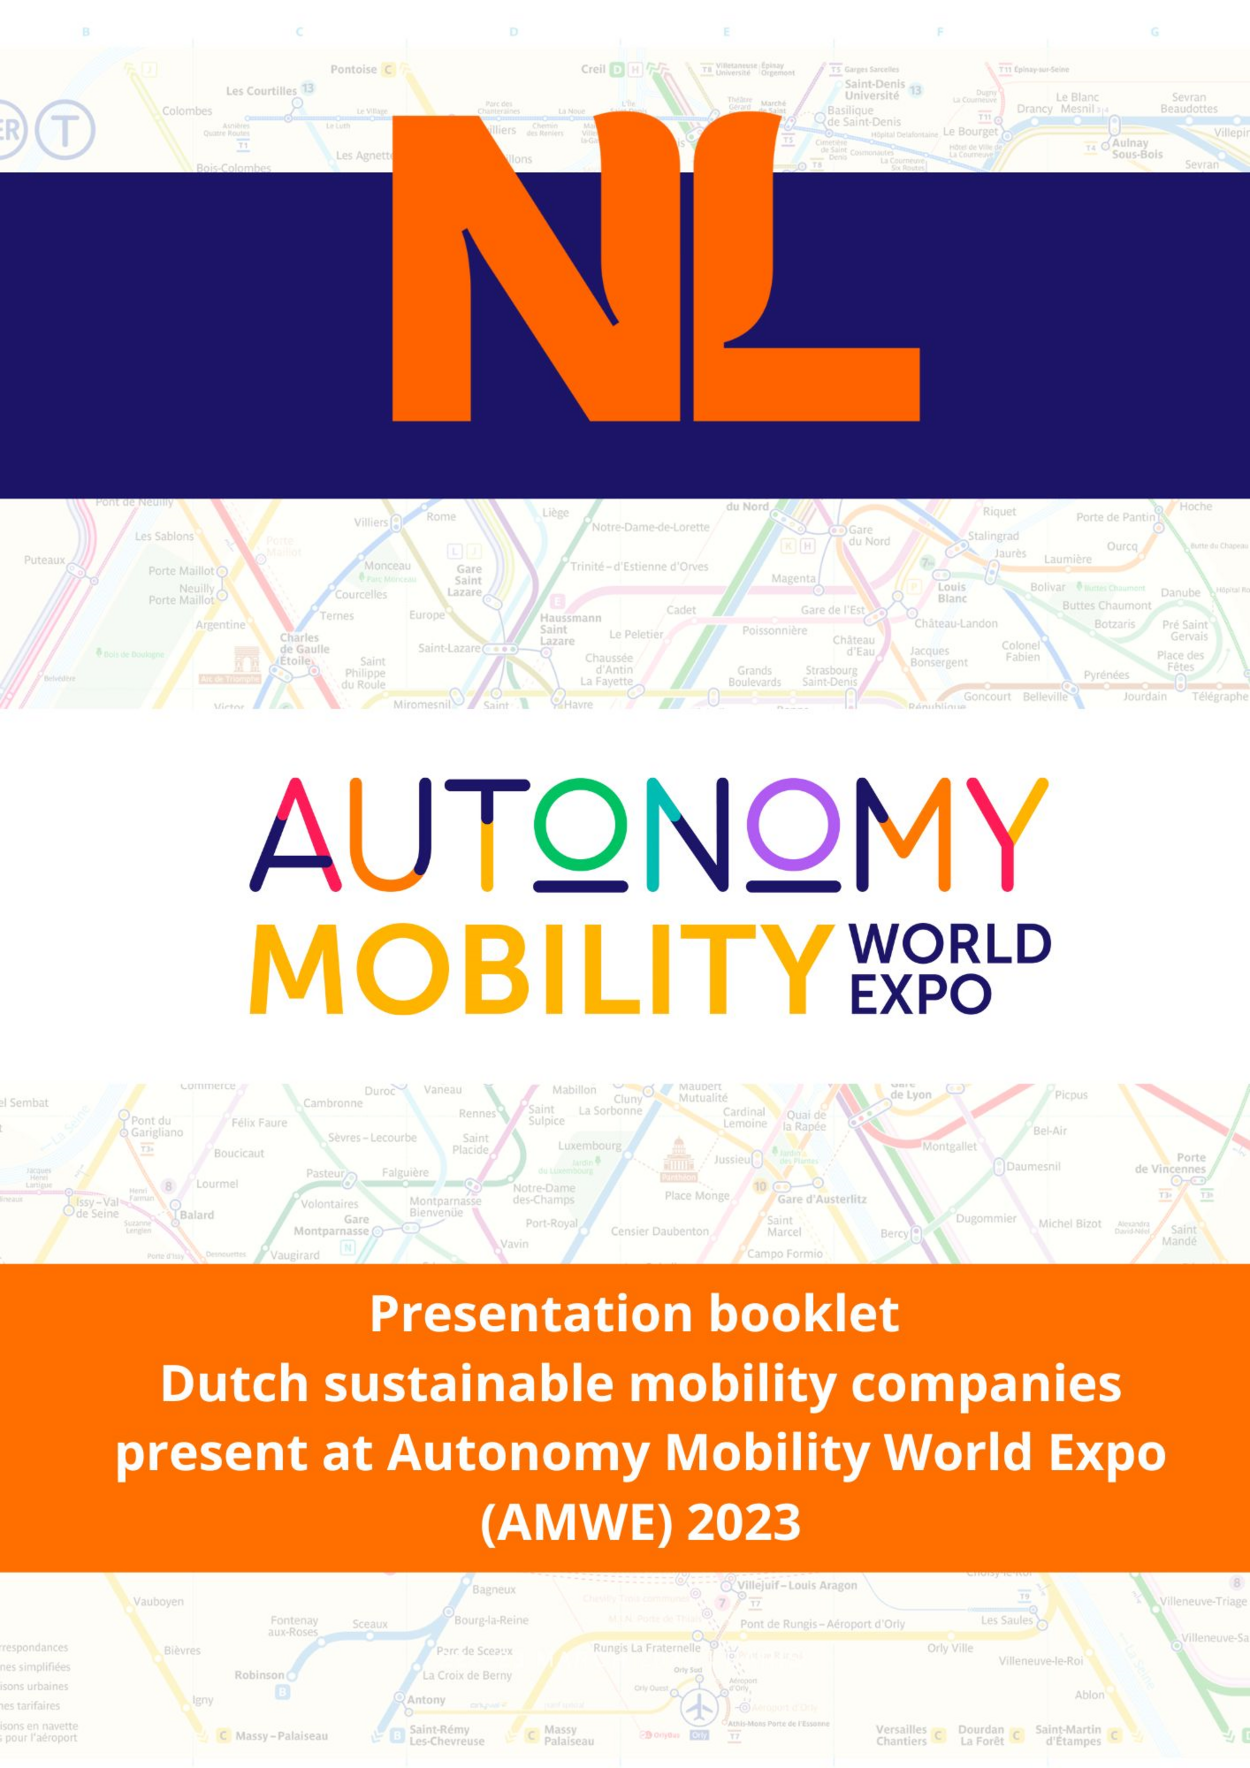 Presentation booklet Dutch sustainable mobility companies present at Autonomy Mobility World Expo(AMWE) 2023